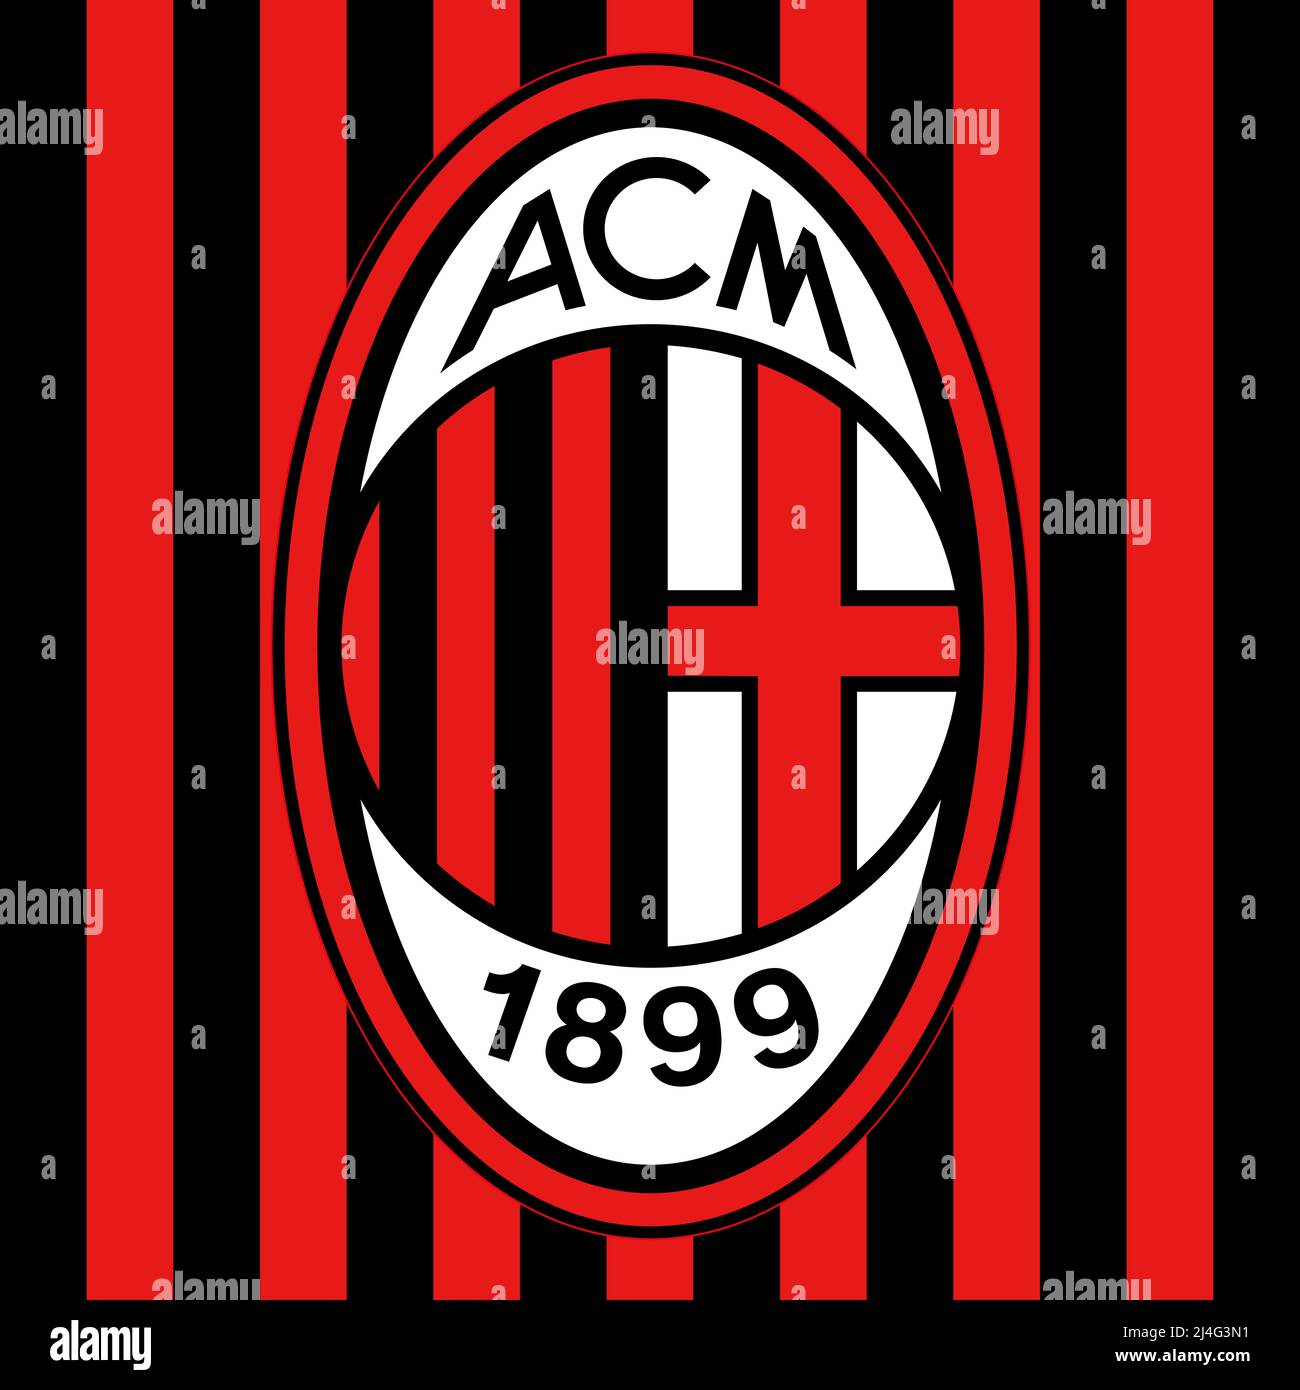 Milan, Italy, April 2022 - Milan A.C. Football Club brand logo with red and  black colors, illustration Stock Photo - Alamy